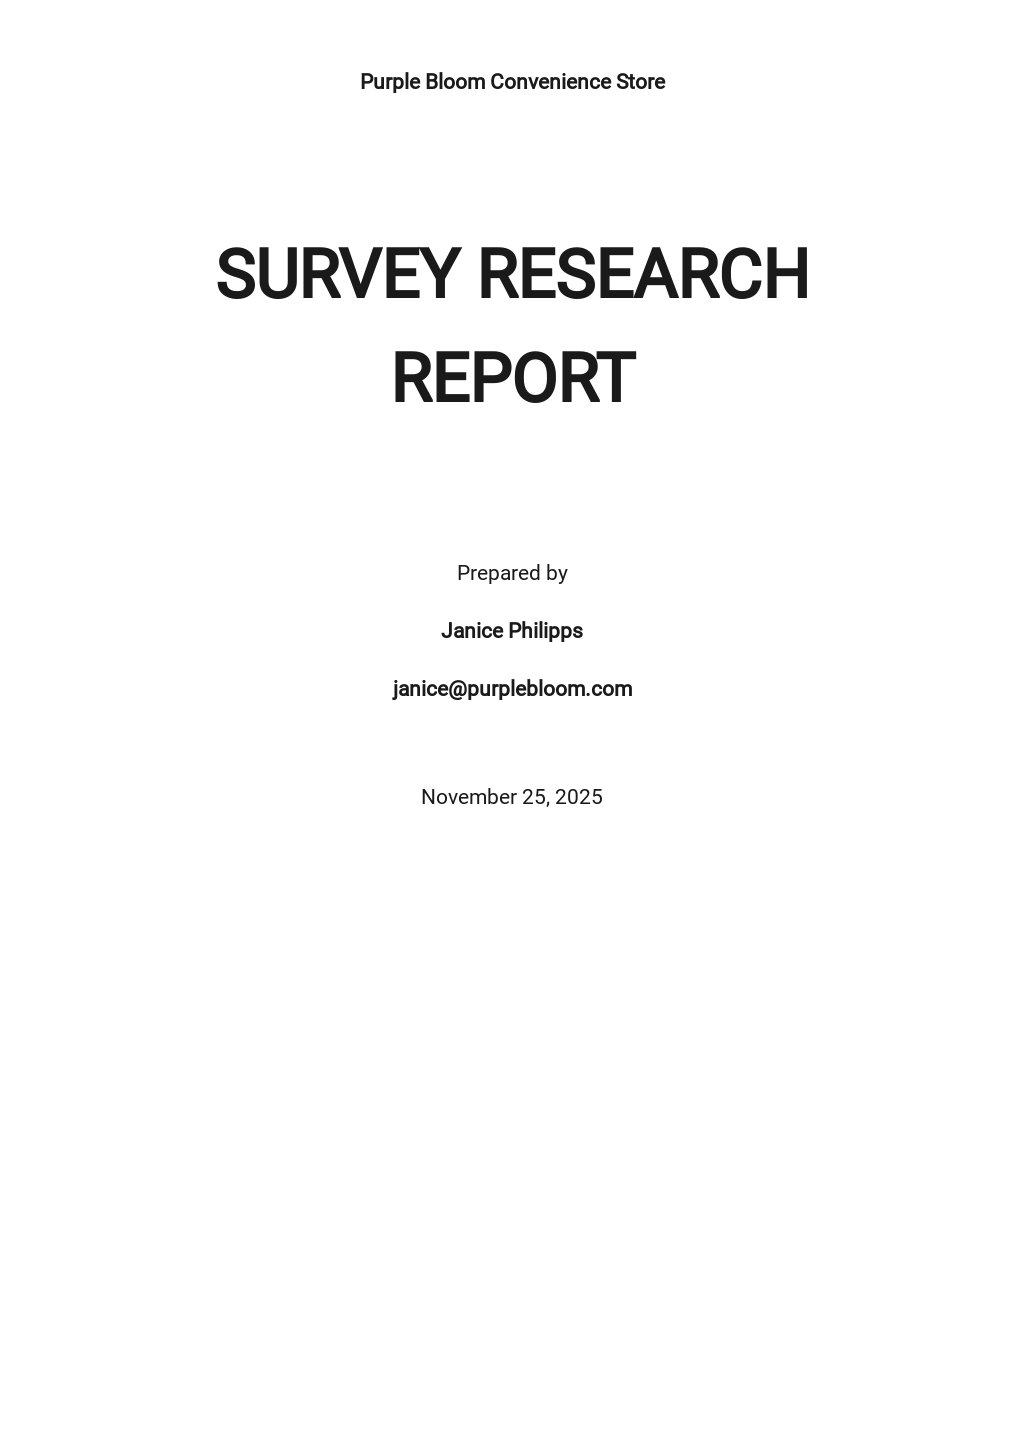 title of the research report